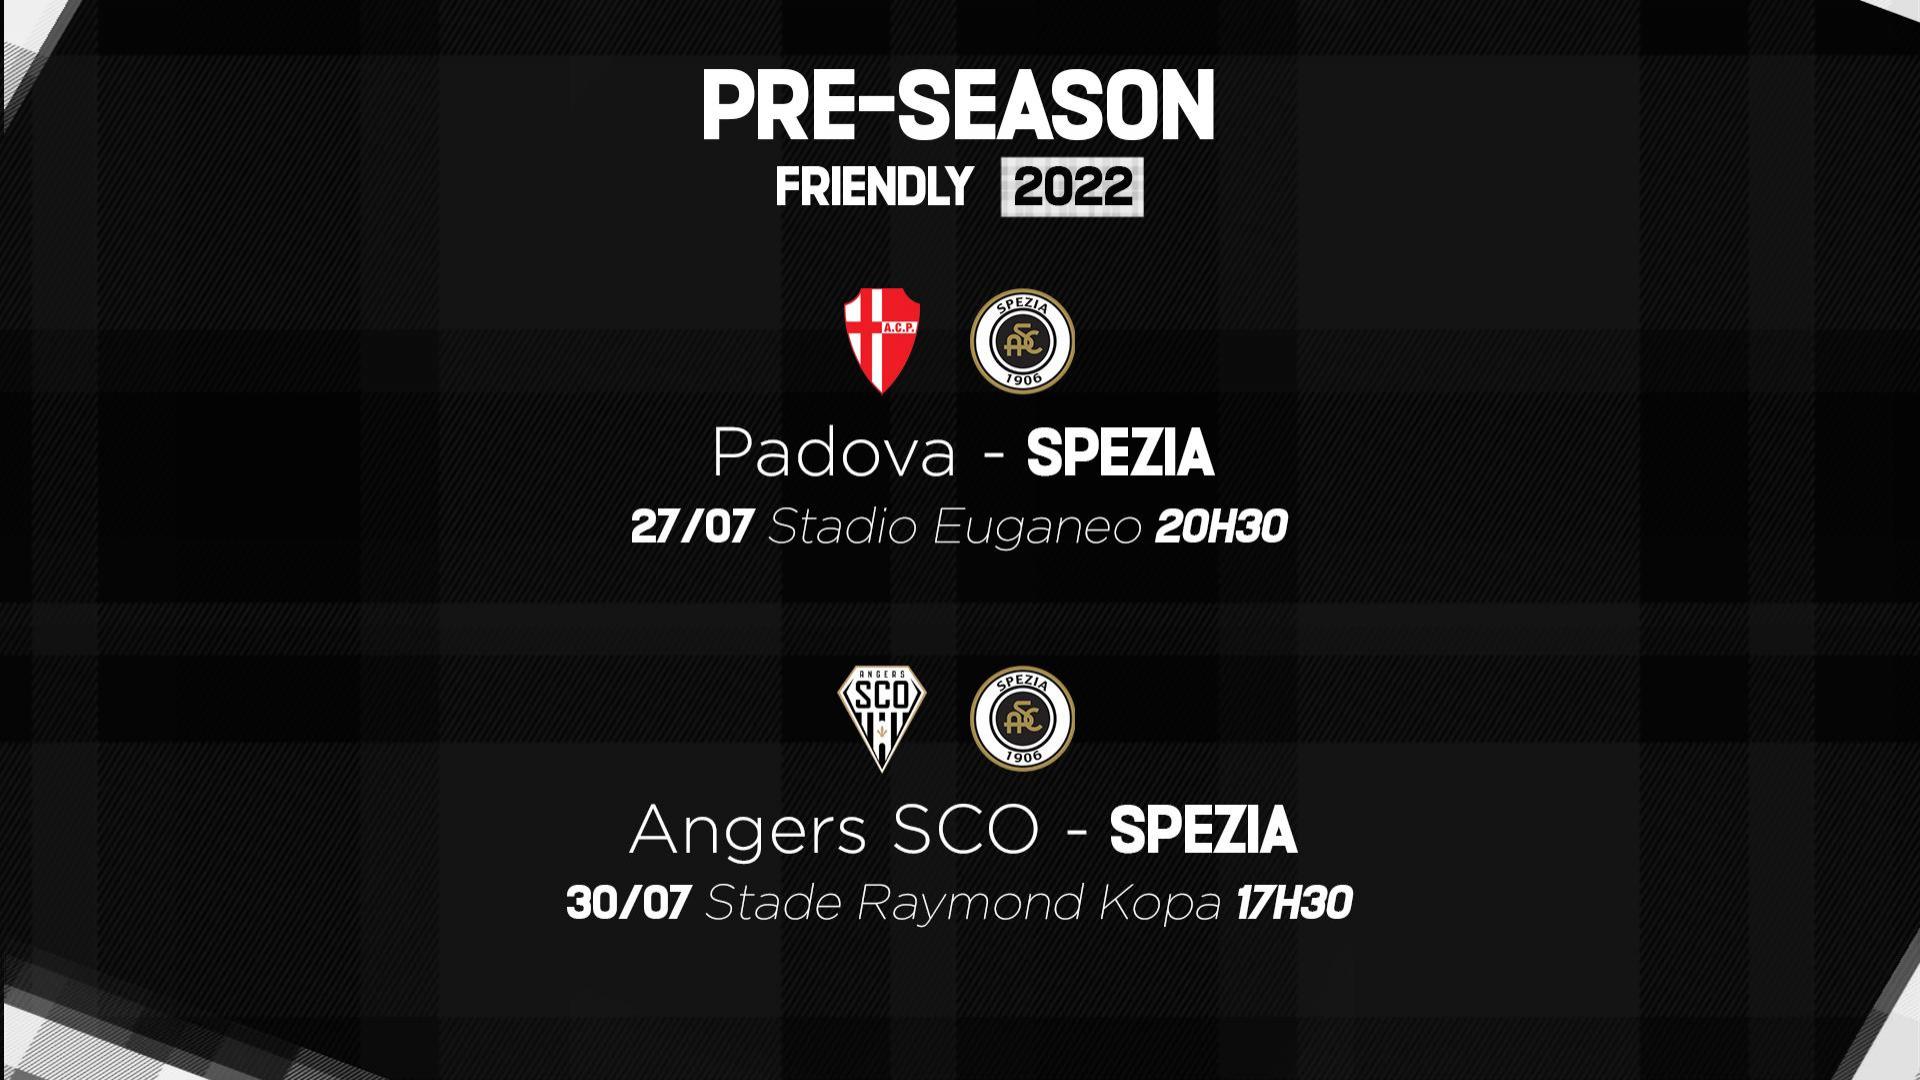 Friendly matches against Padova and Angers for the Eagles